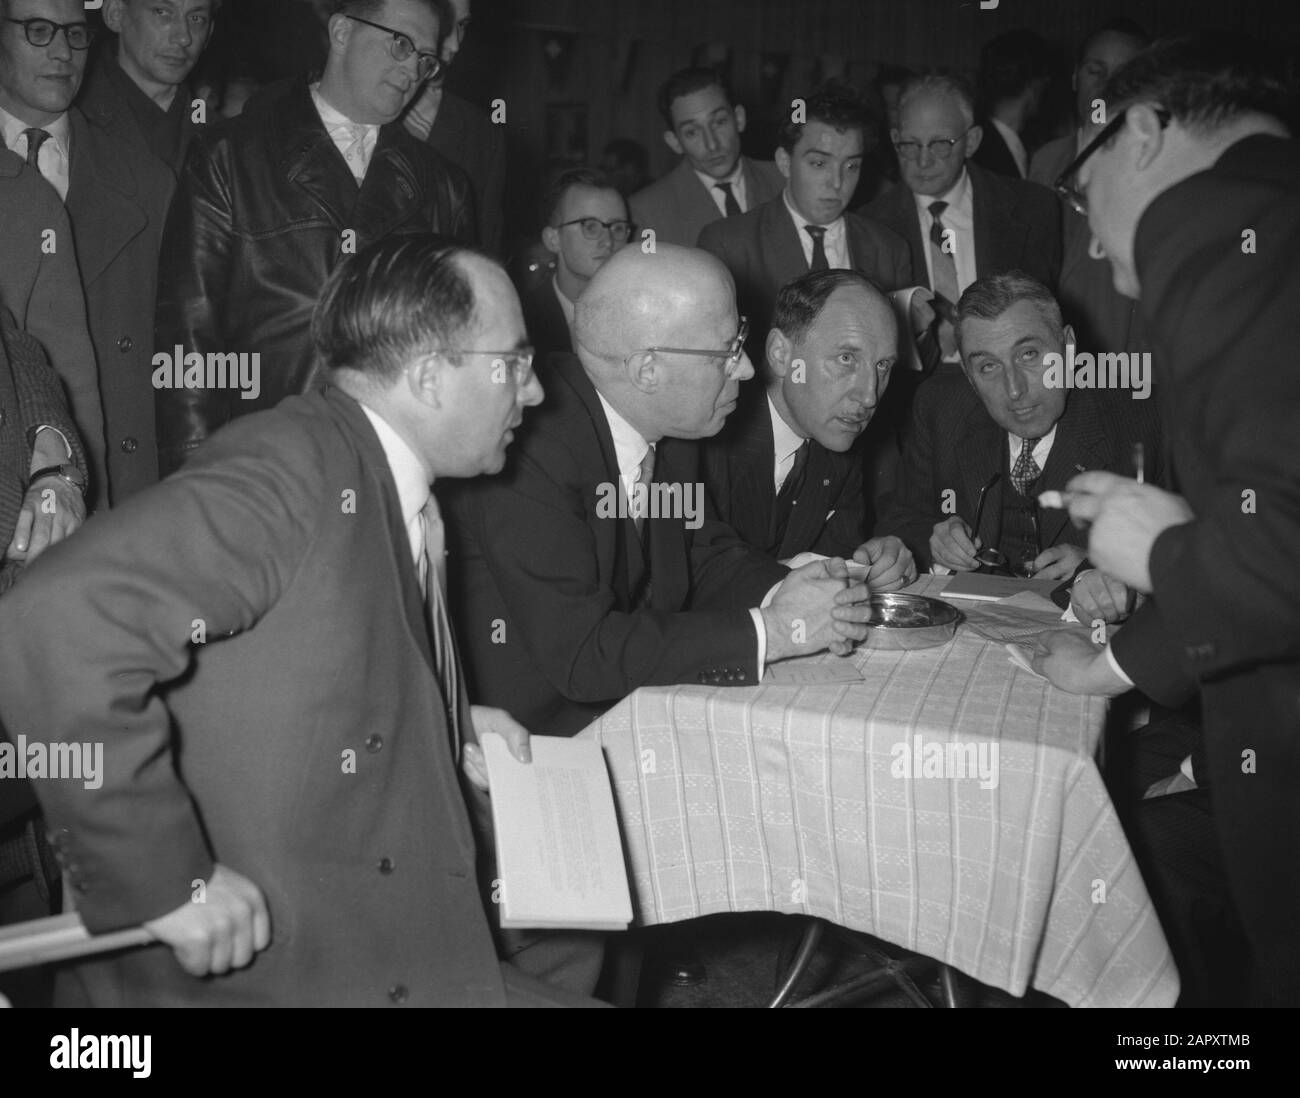 Election meeting of the KVP in the Krasnapolsky v.l.n.r. State Secretary Mr. Hoppener, Minister Luns Prime Minister Beel and Minister Cals Date: March 12, 1959 Stock Photo